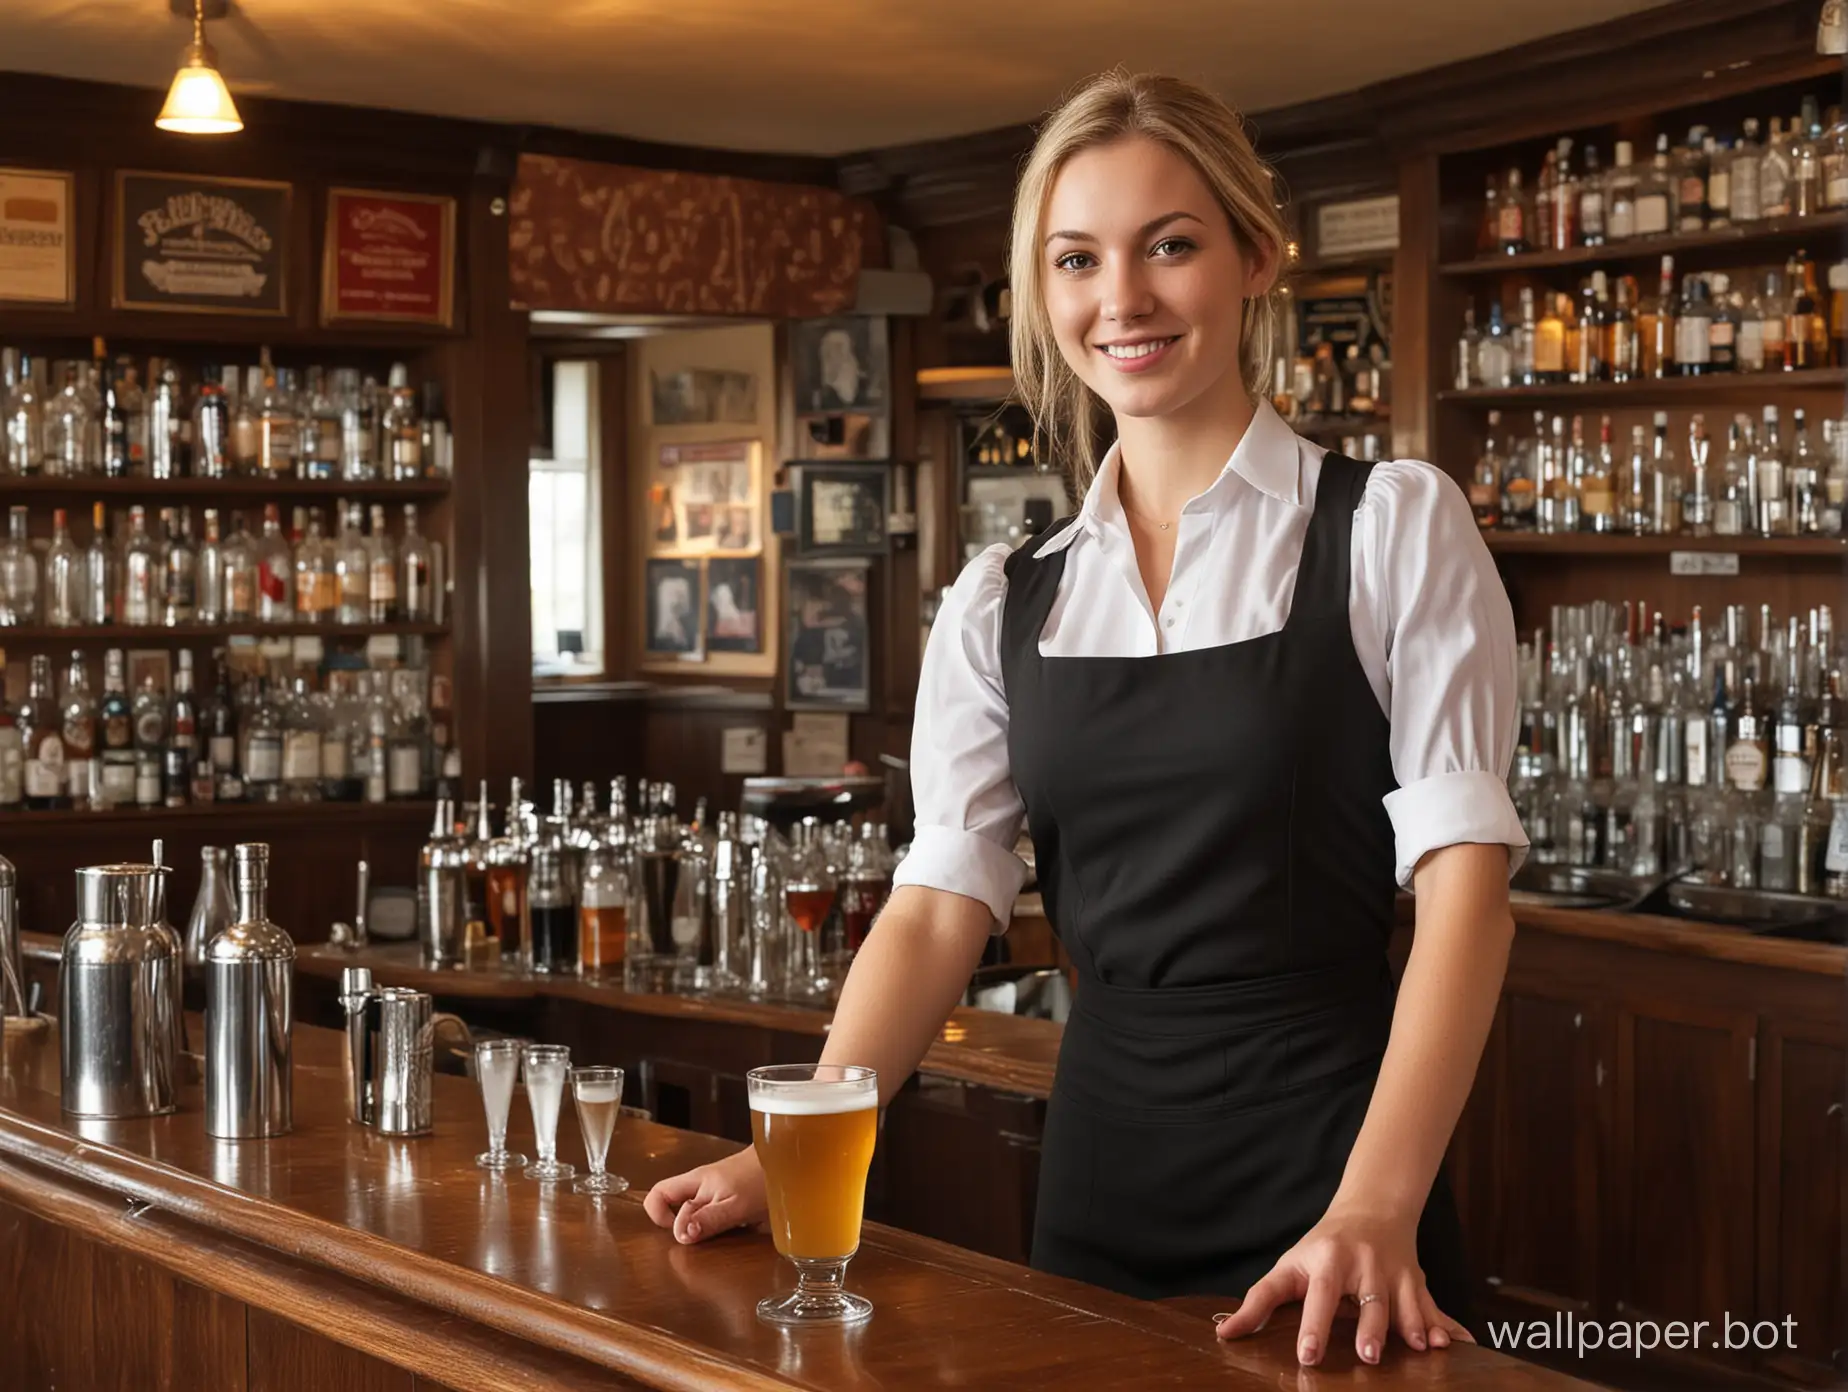 Friendly-Waitress-Serving-Refreshing-Drinks-in-Authentic-English-Pub-Atmosphere